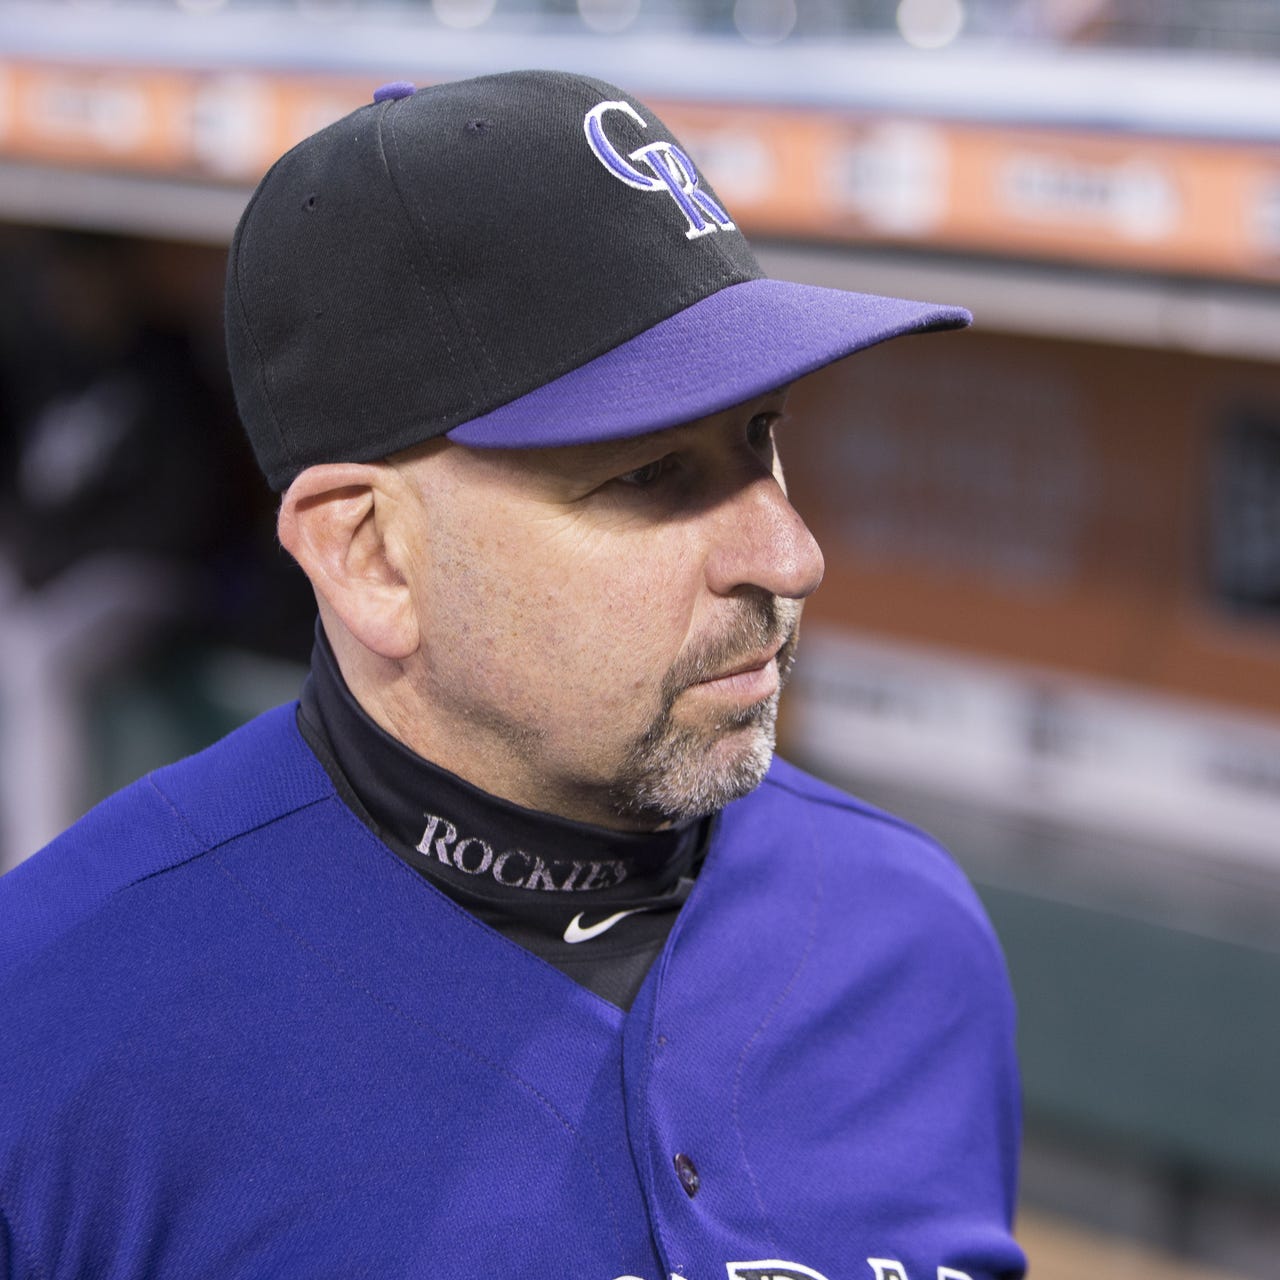 Rockies players weigh in on new shade of purple – SportsLogos.Net News